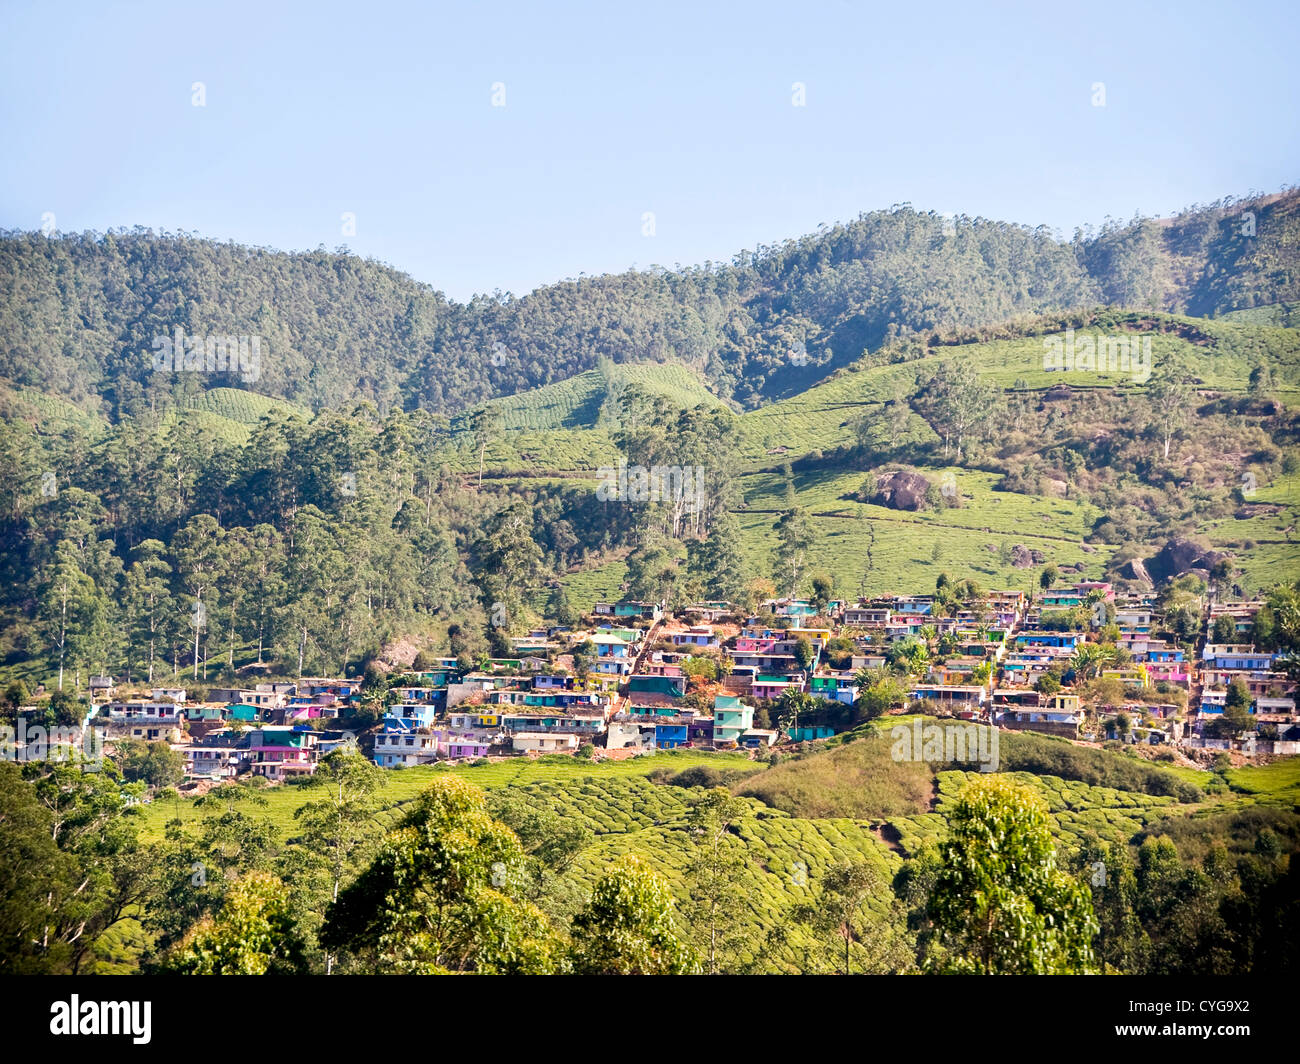 Horizontal view of the colourful lowrise houses covering the slopes of the hills in Munnar, India. Stock Photo